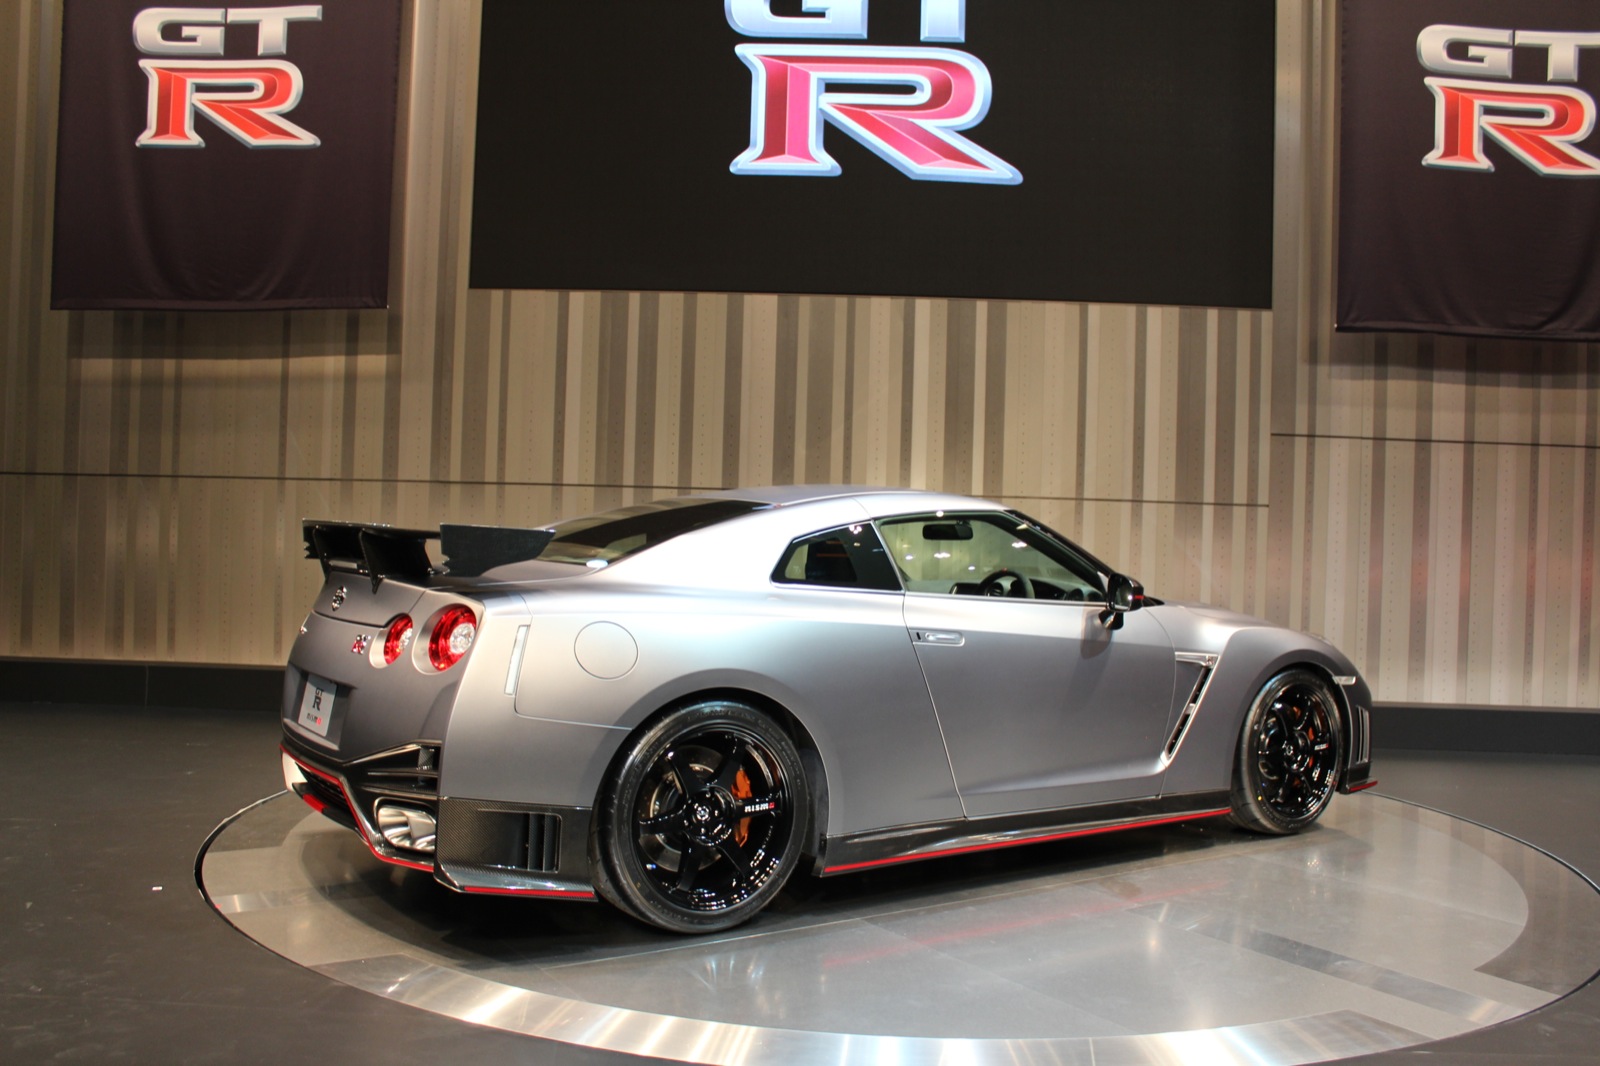 2015-nissan-gt-r-nismo--tokyo-motor-show-preview-event-nissan-global-headquarters_100446454_h